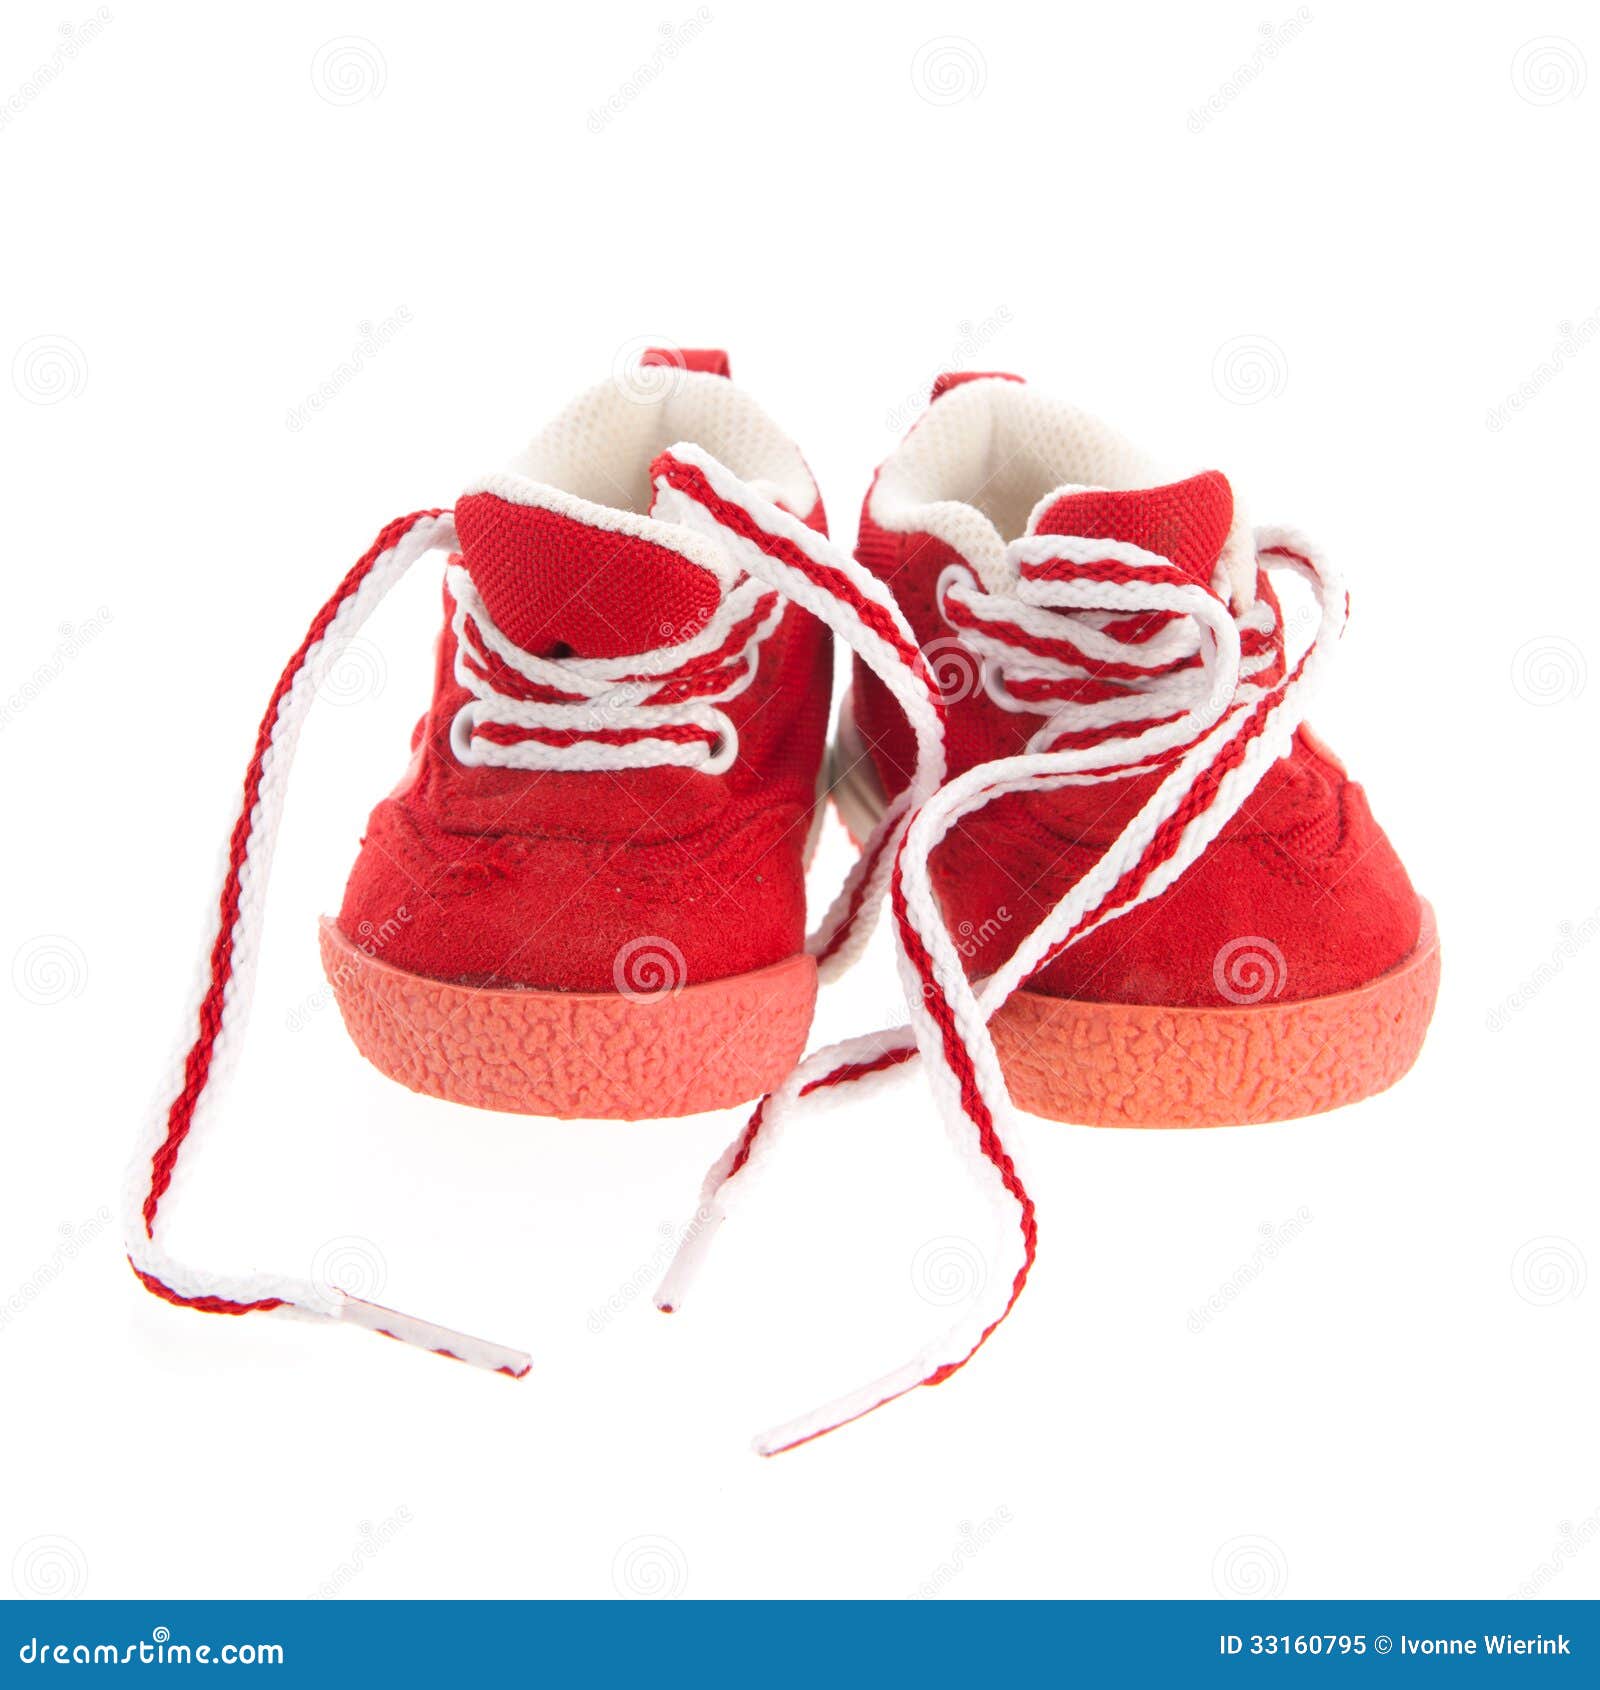 Baby Shoes Royalty Free Stock Photo - Image: 33160795